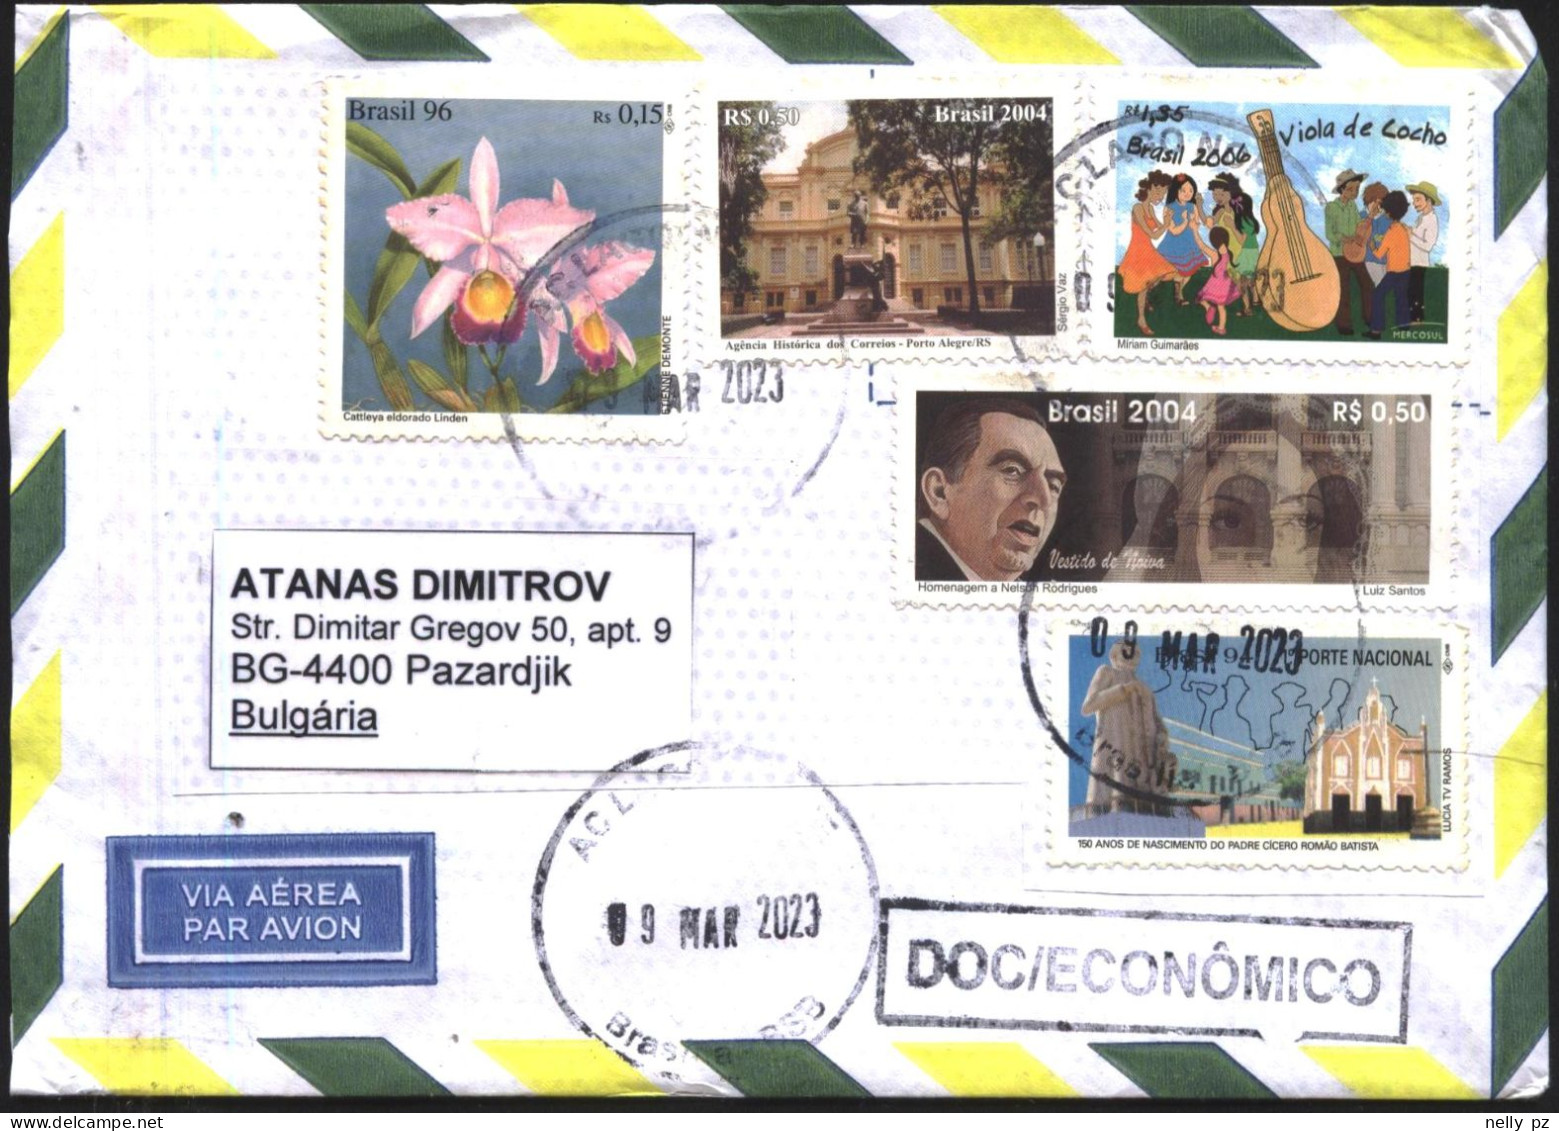 Mailed Cover With Stamps Flowers 1996 Architectura 2004  From Brazil Brasil - Covers & Documents